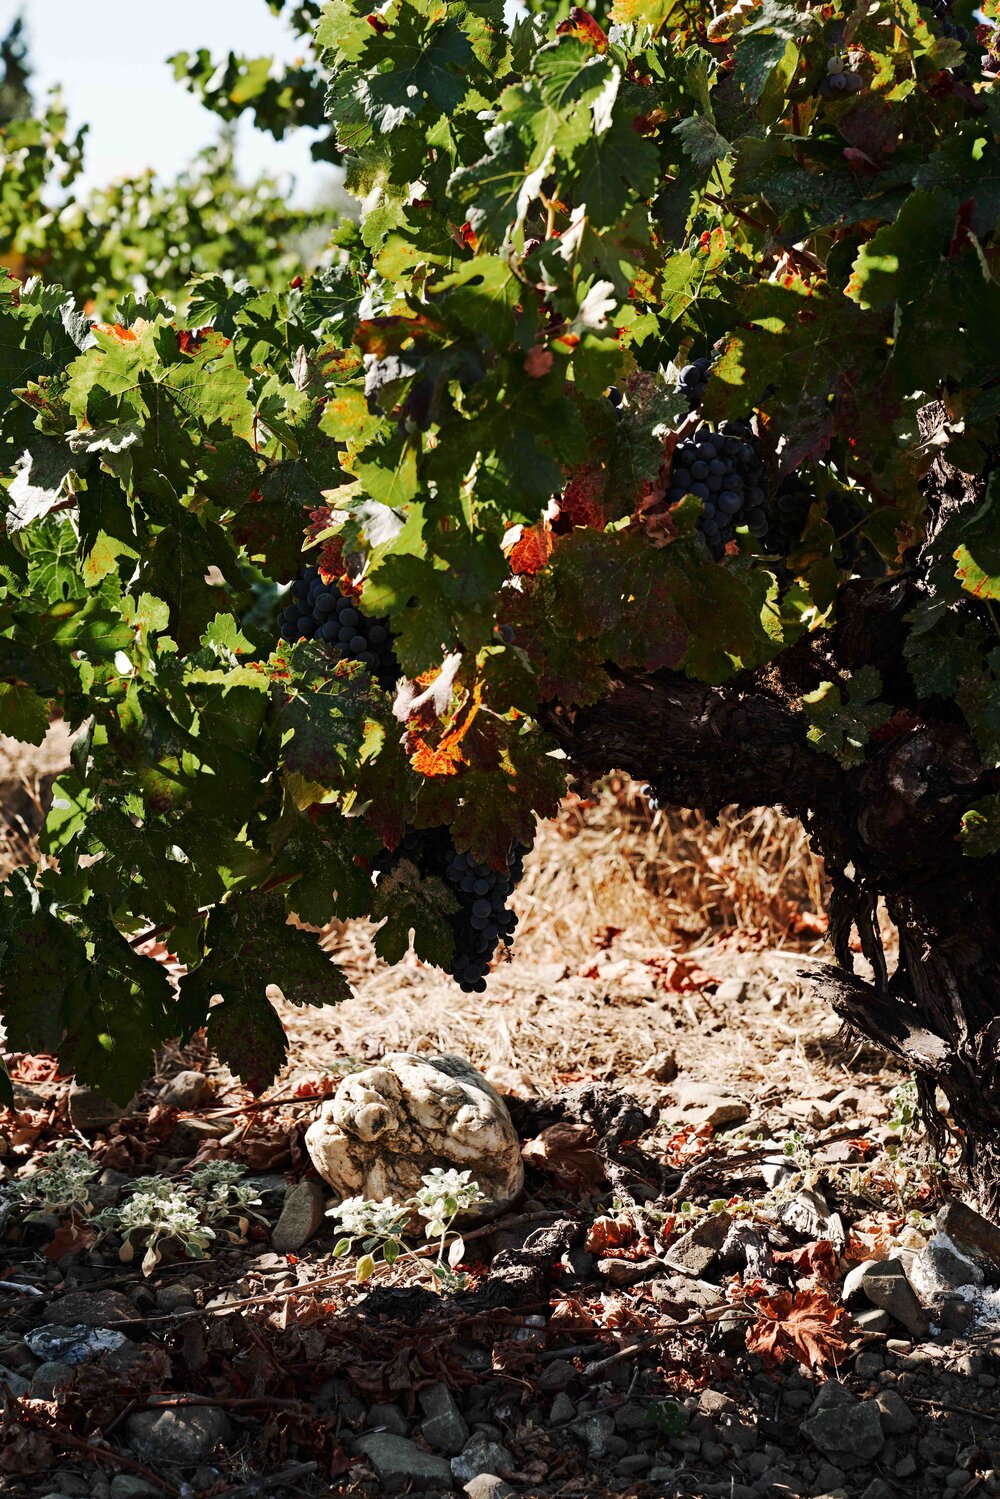 Carignan clusters staying cool in the afternoon shade at Venturi Vineyard in Mendocino County